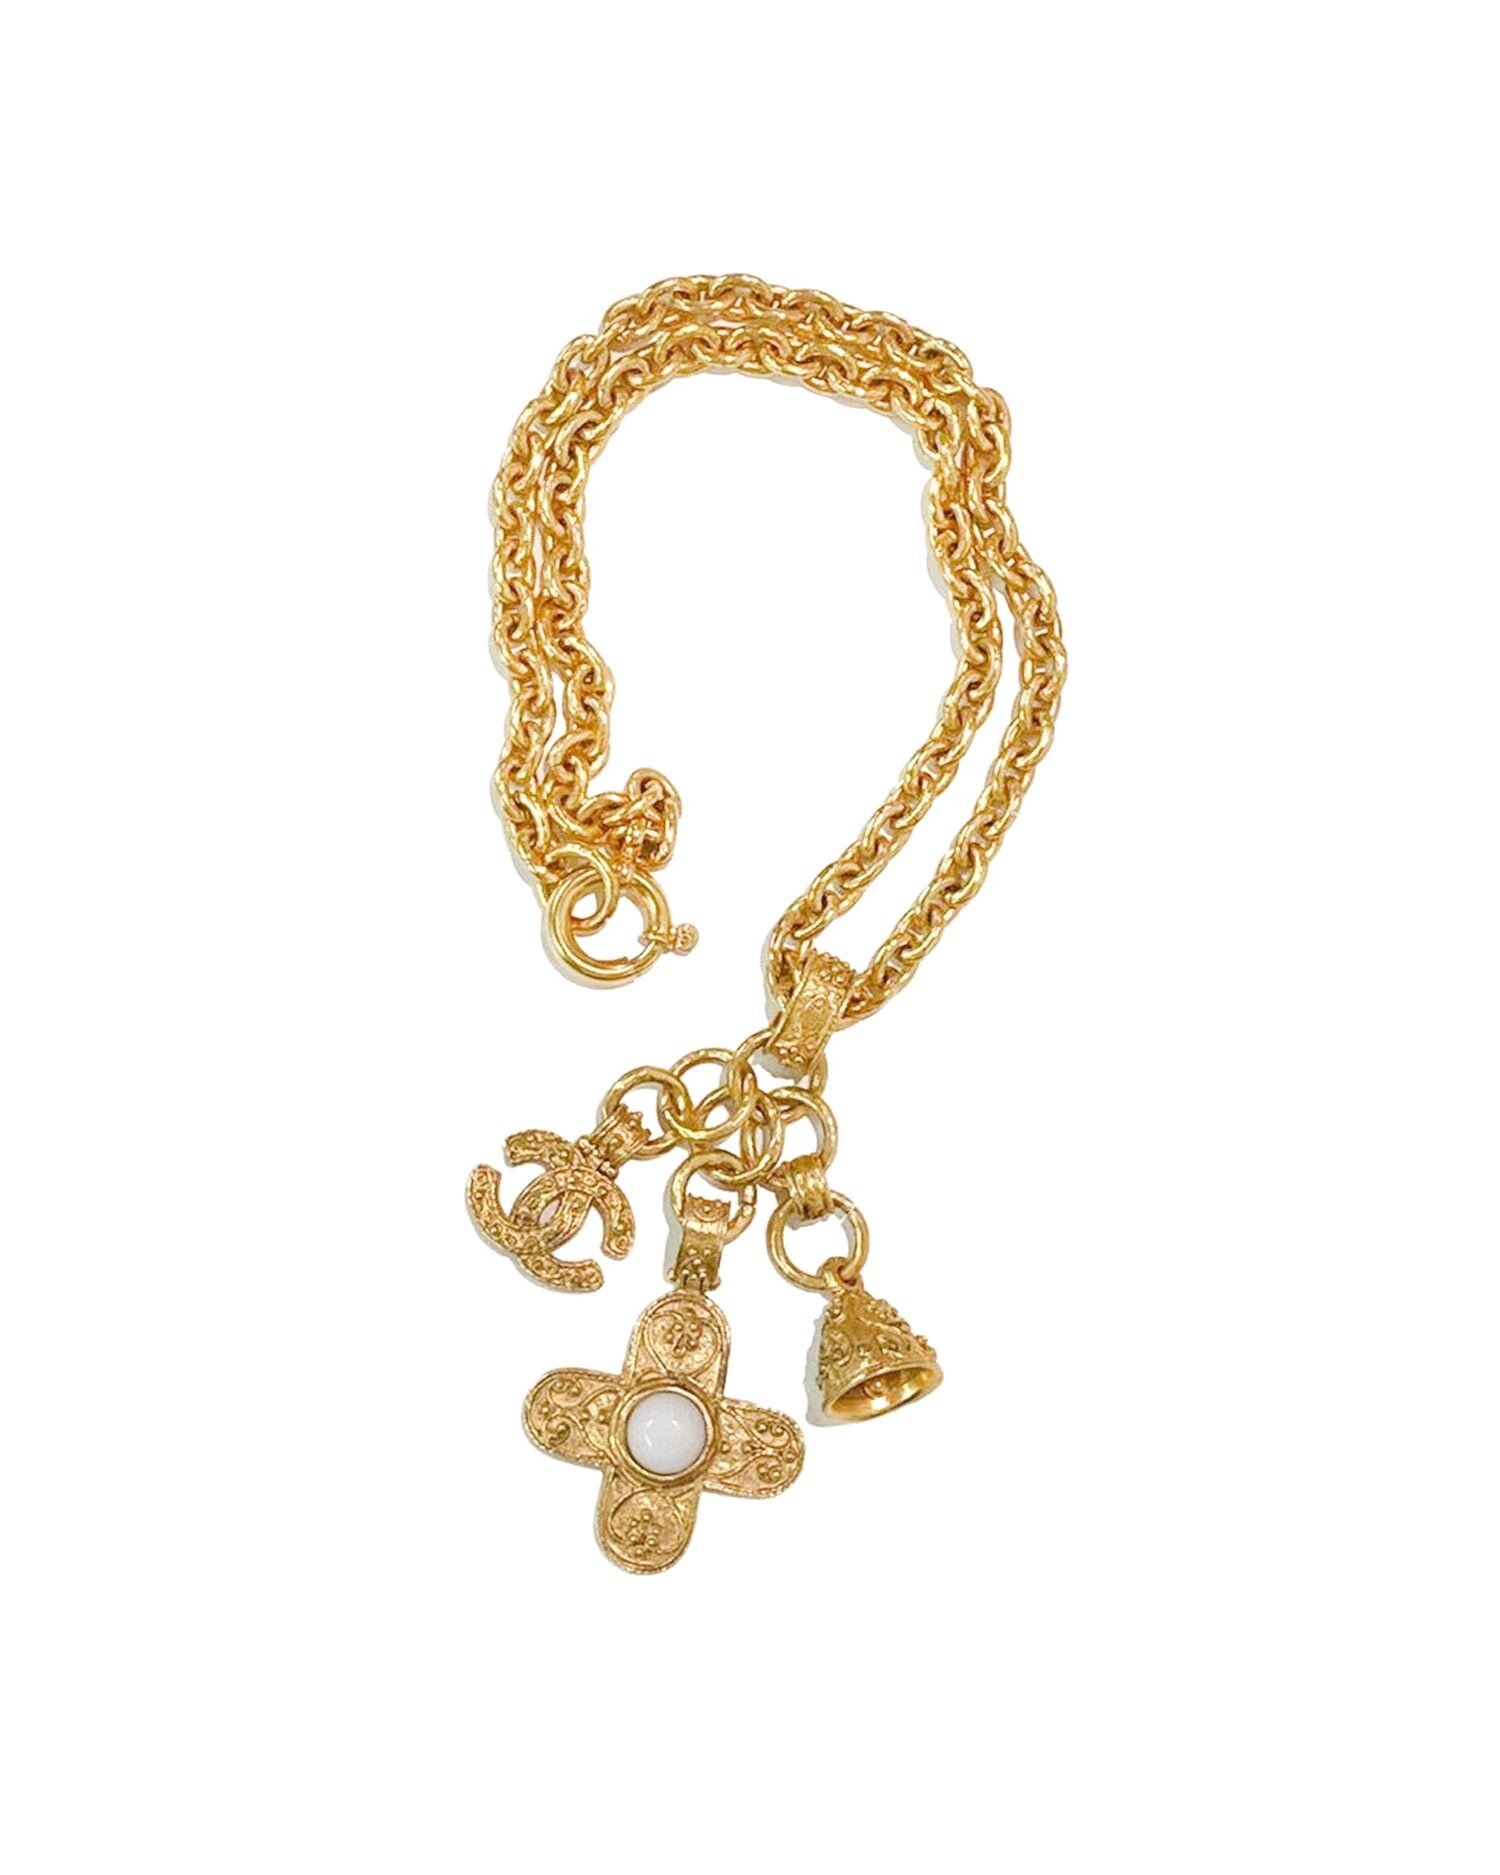 Chanel Rare 1994 Gold Cross Charms Necklace · INTO